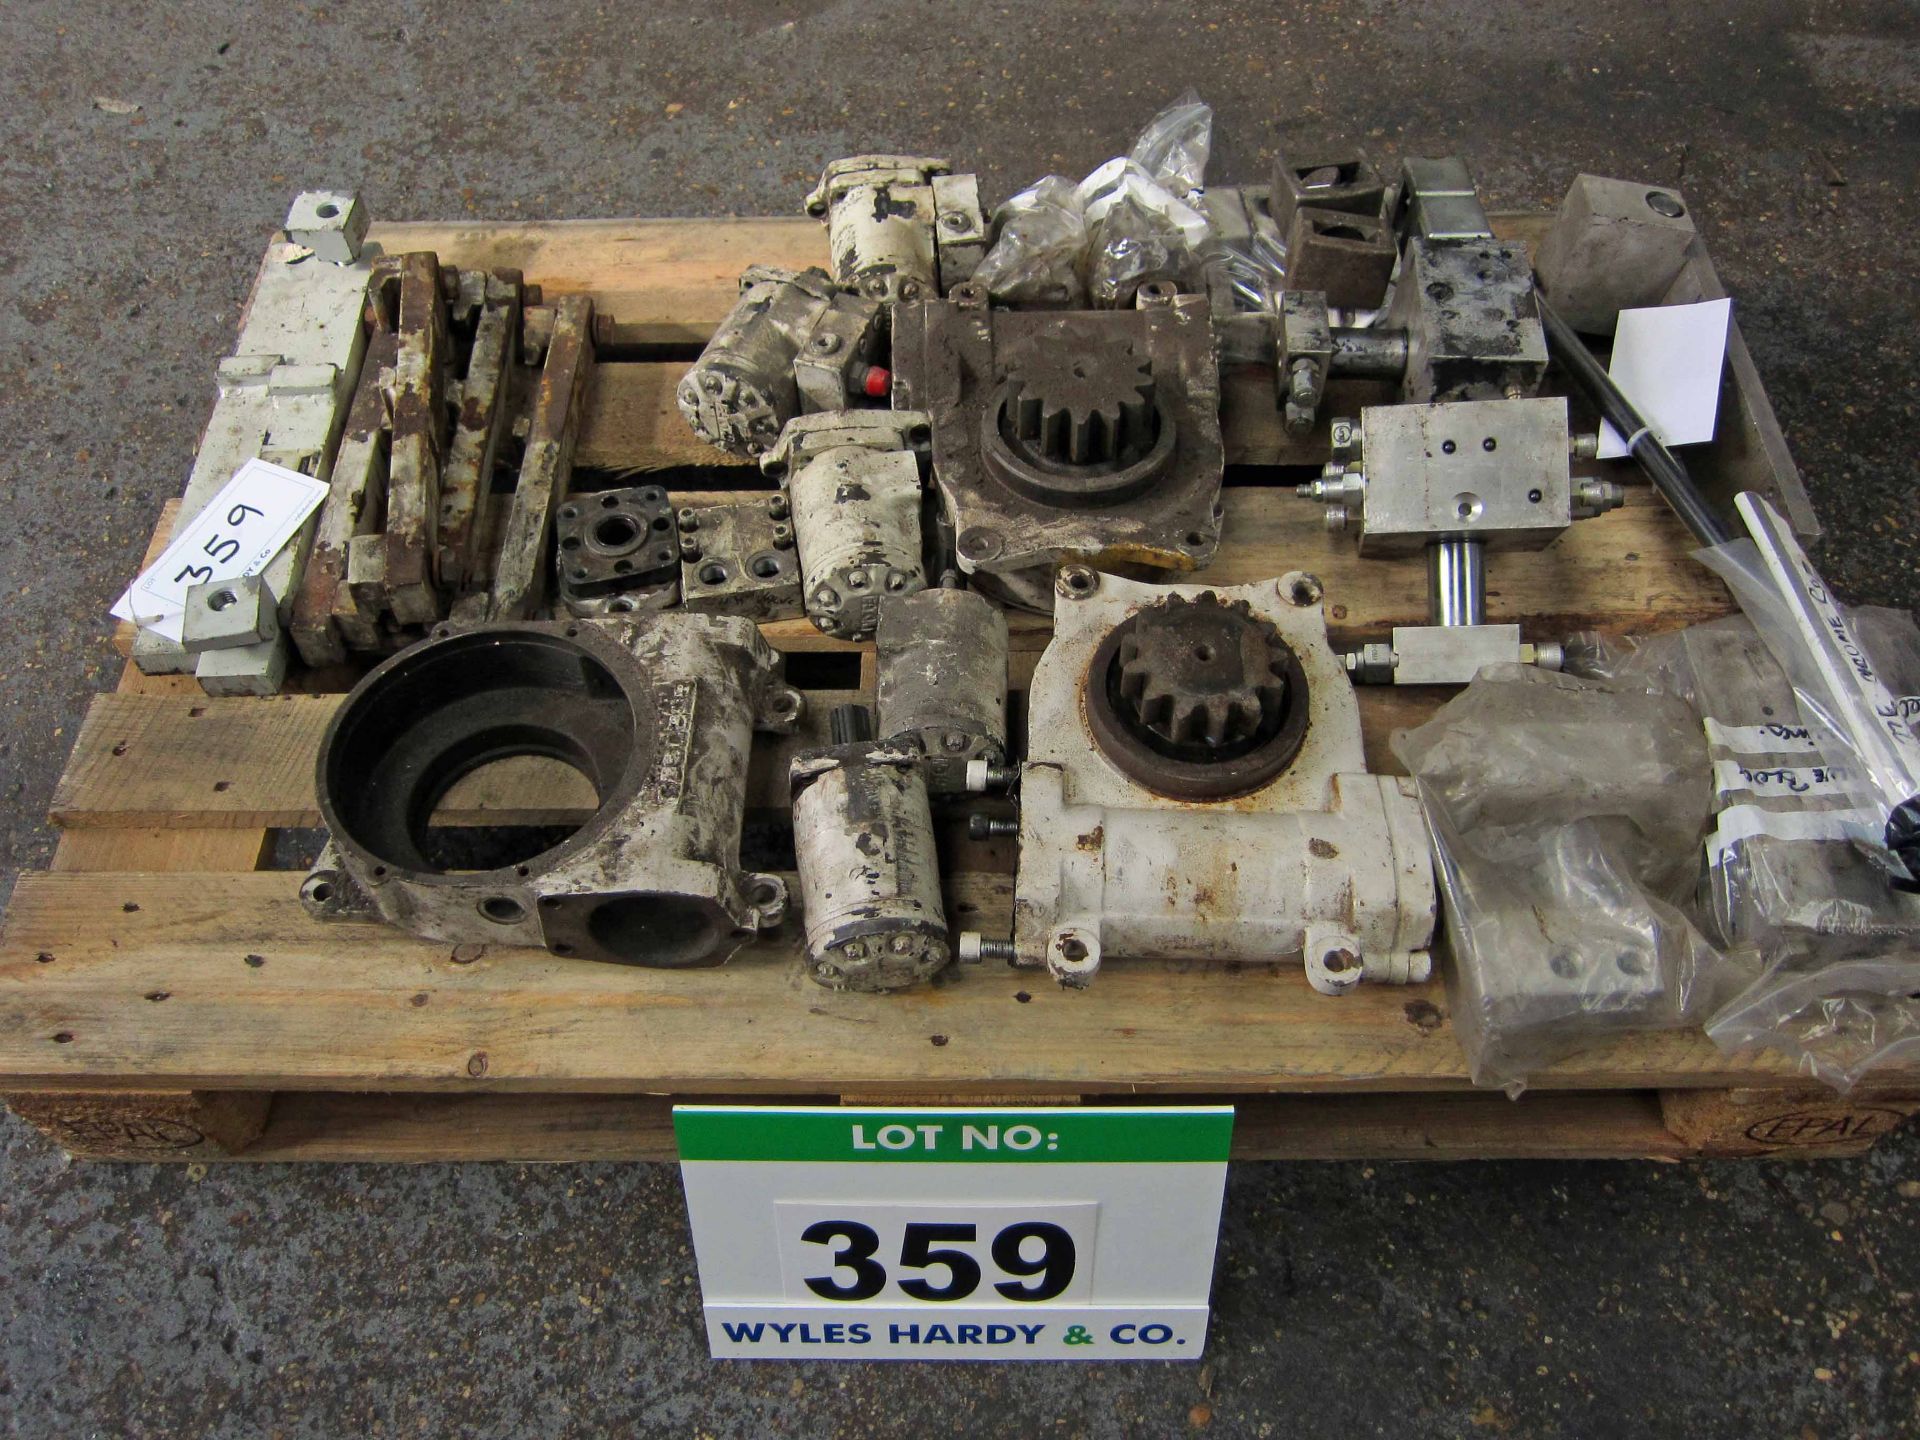 A Pallet of CASCADE Gearboxes and Gearbox Components, Hydraulic Motors, Hydraulic Rotary Groups, - Image 2 of 3